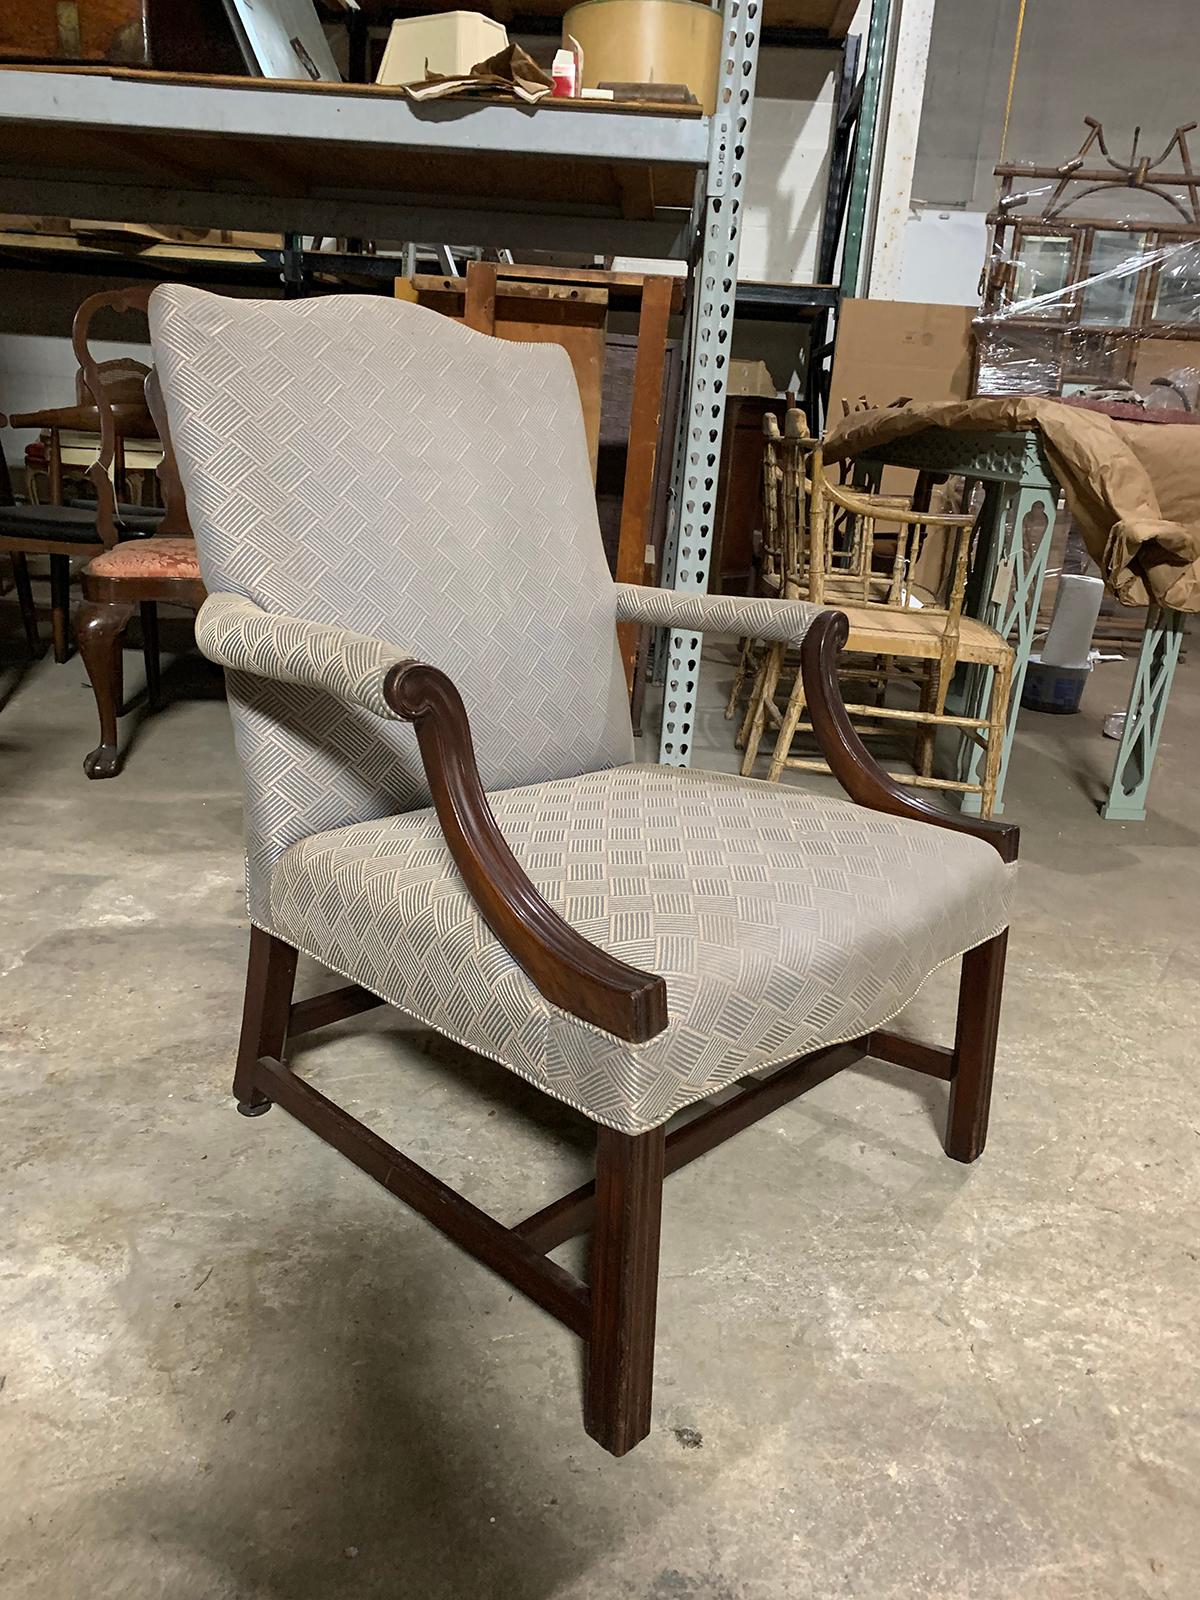 19th century English upholstered library chair
Measures: 28.5